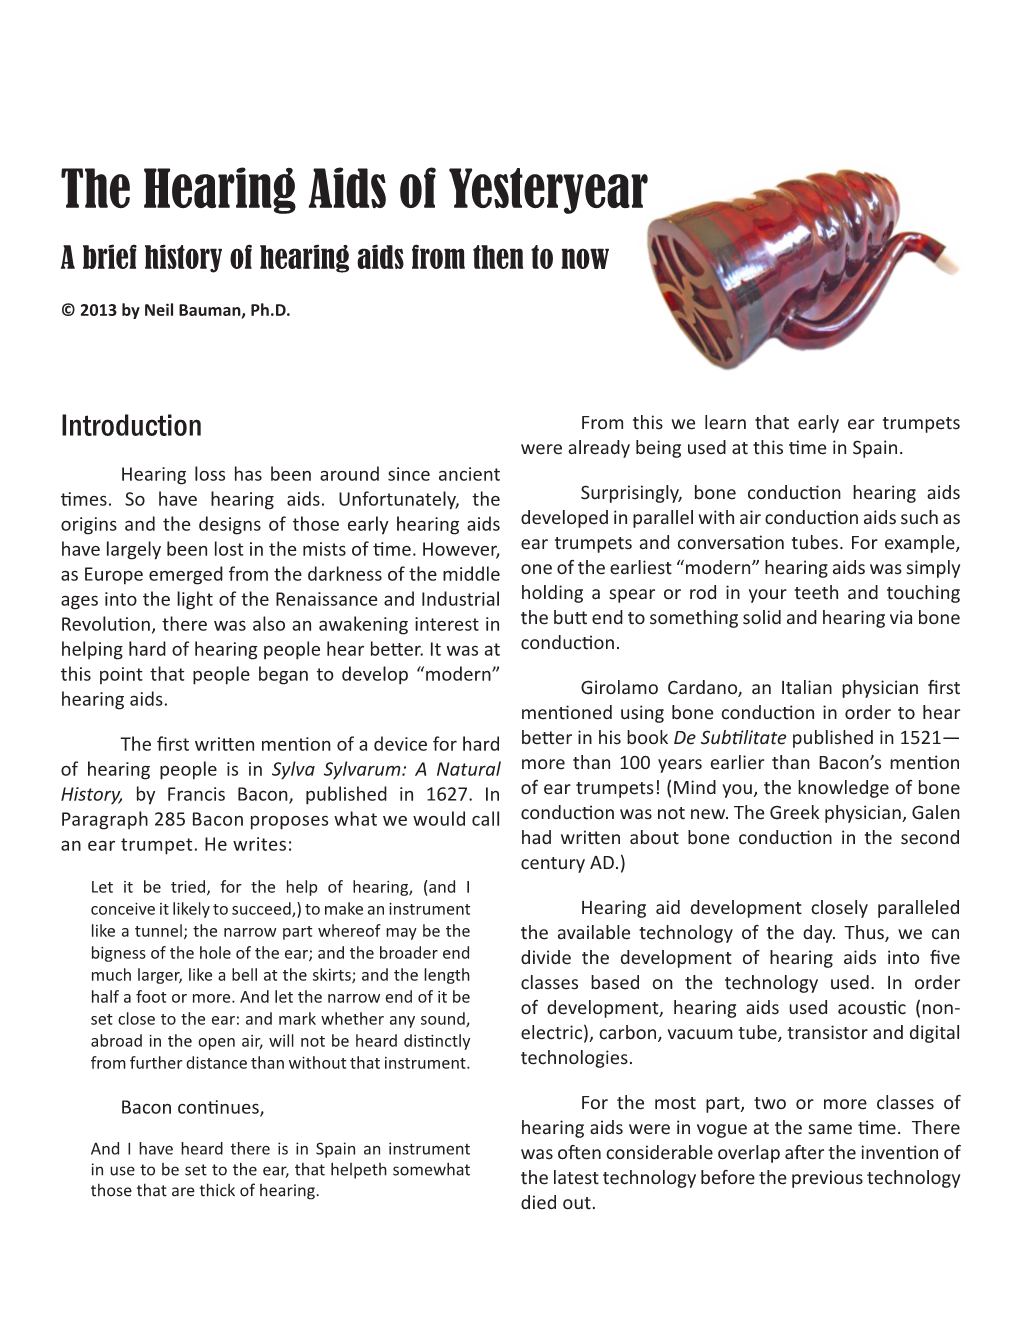 The Hearing Aids of Yesteryear a Brief History of Hearing Aids from Then to Now